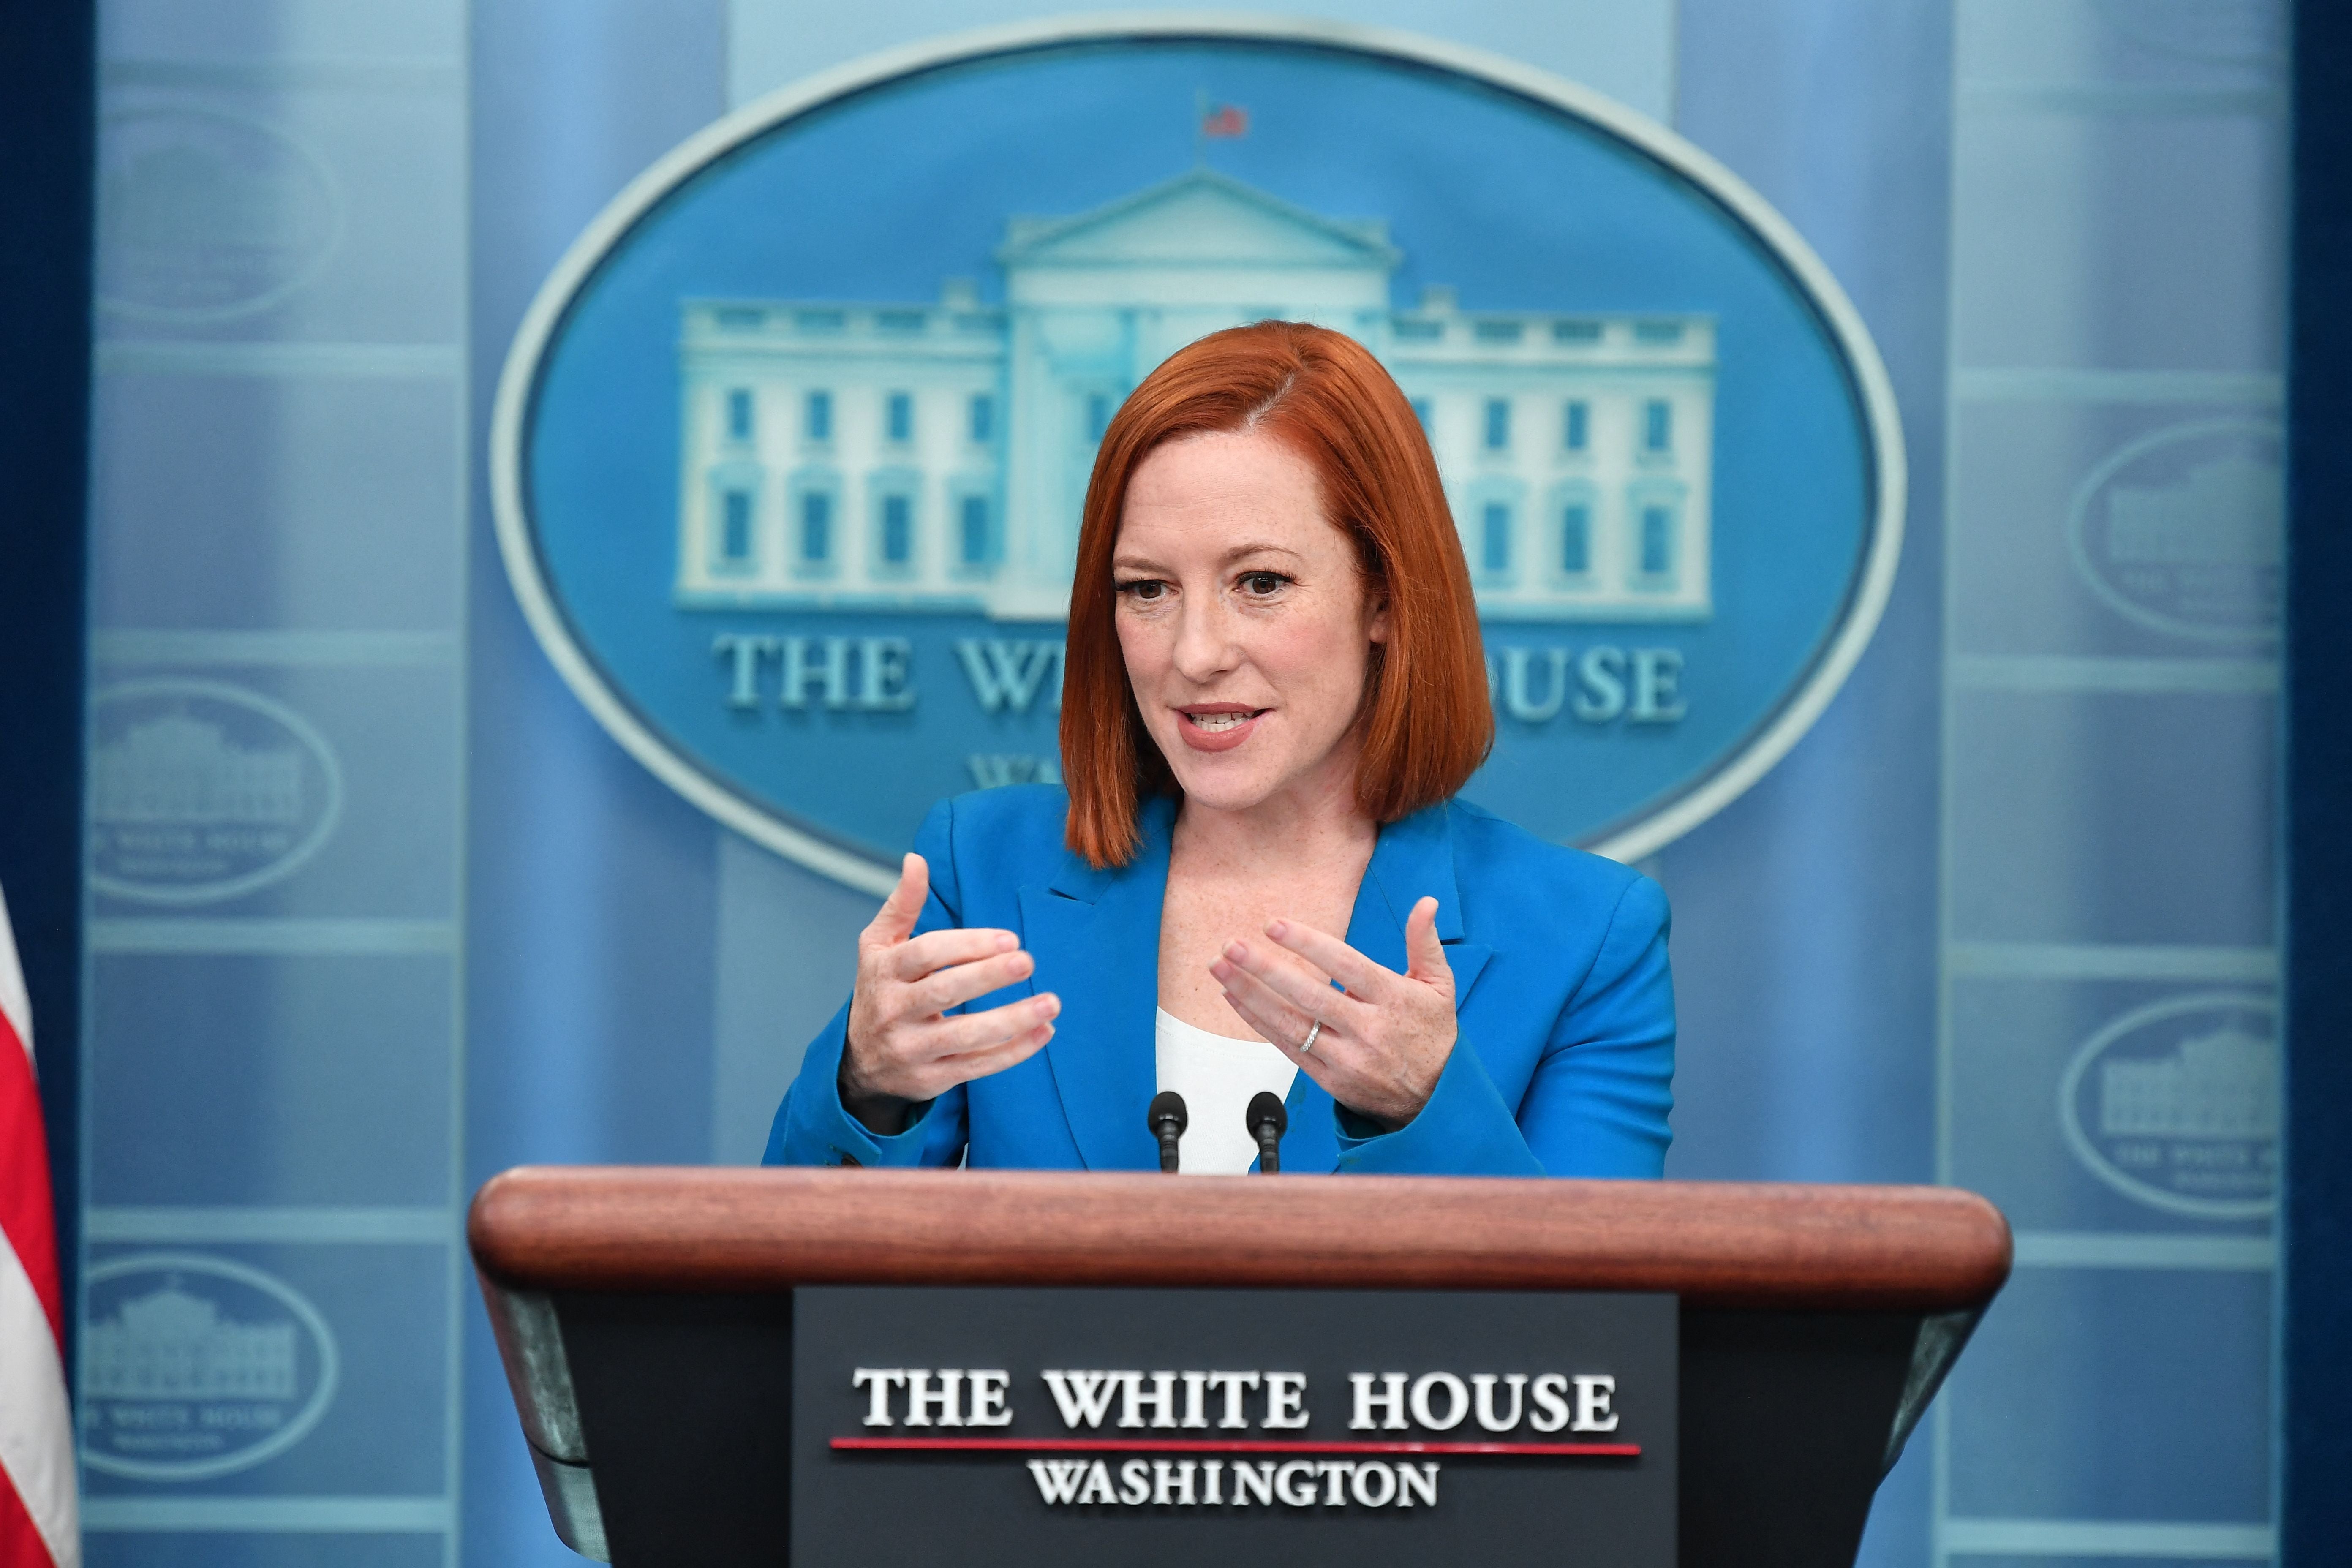 White House press secretary Jen Psaki speaks during a briefing in the James S. Brady Press Briefing Room of the White House in Washington, DC, on March 21, 2022